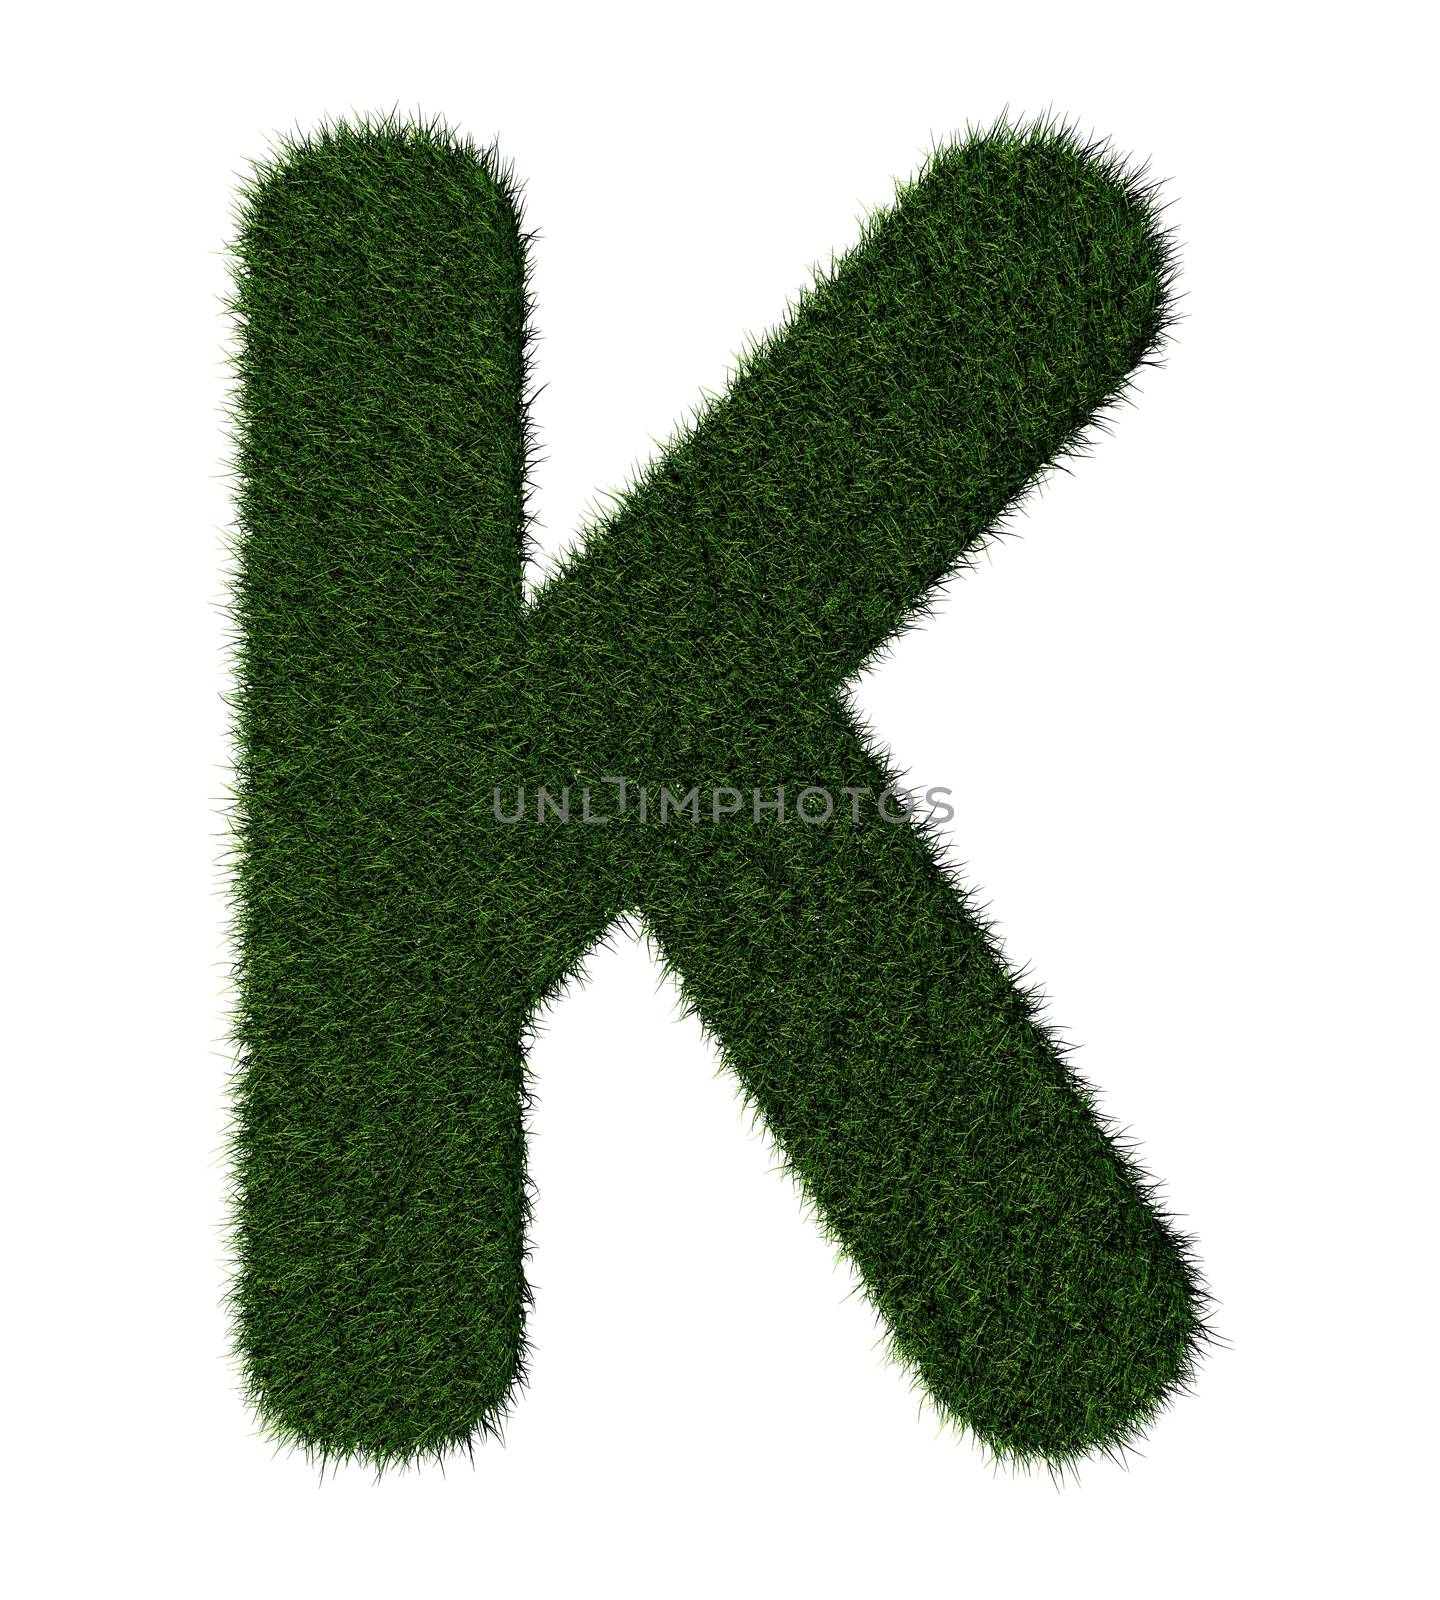 Letter K made with blades of grass